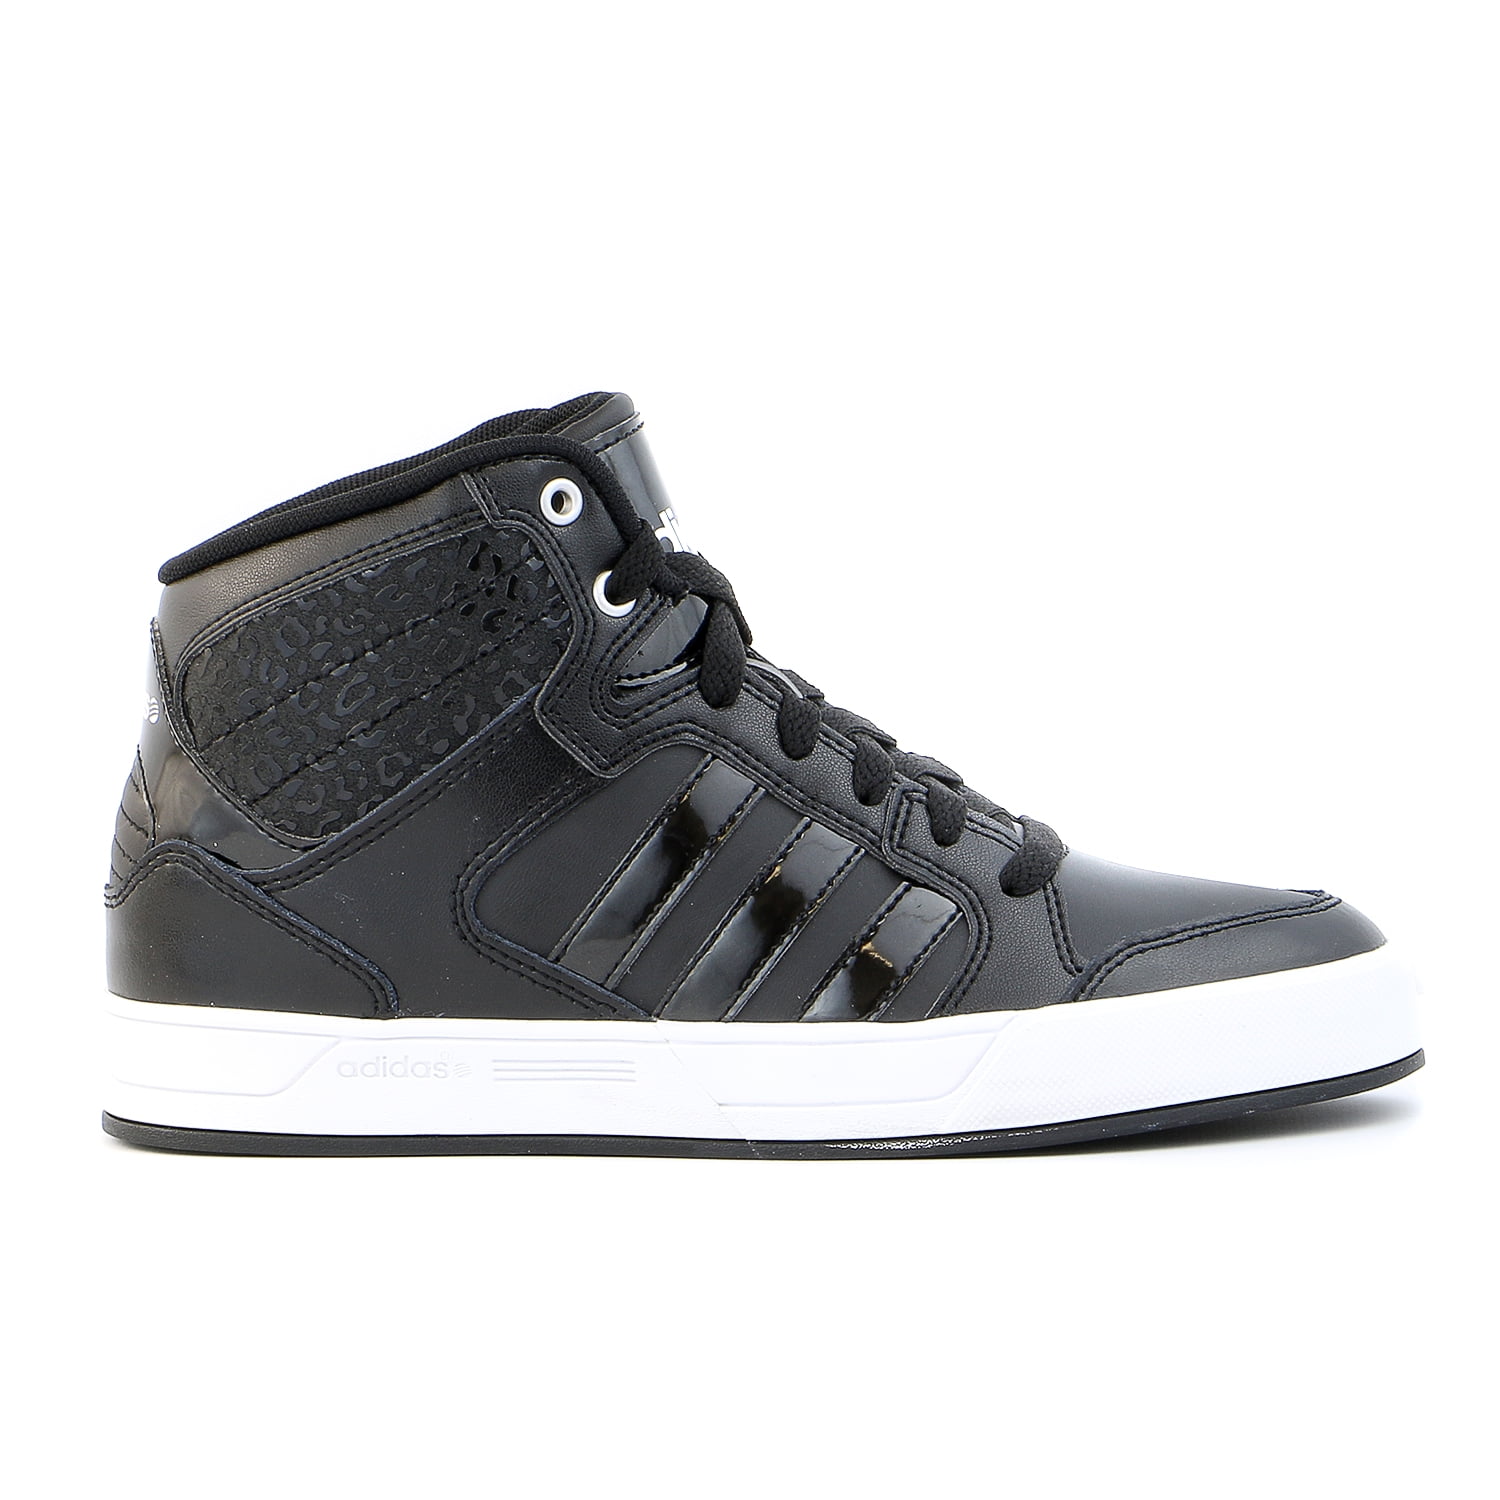 Adidas - Adidas BBNEO Raleigh Mid Shoes 